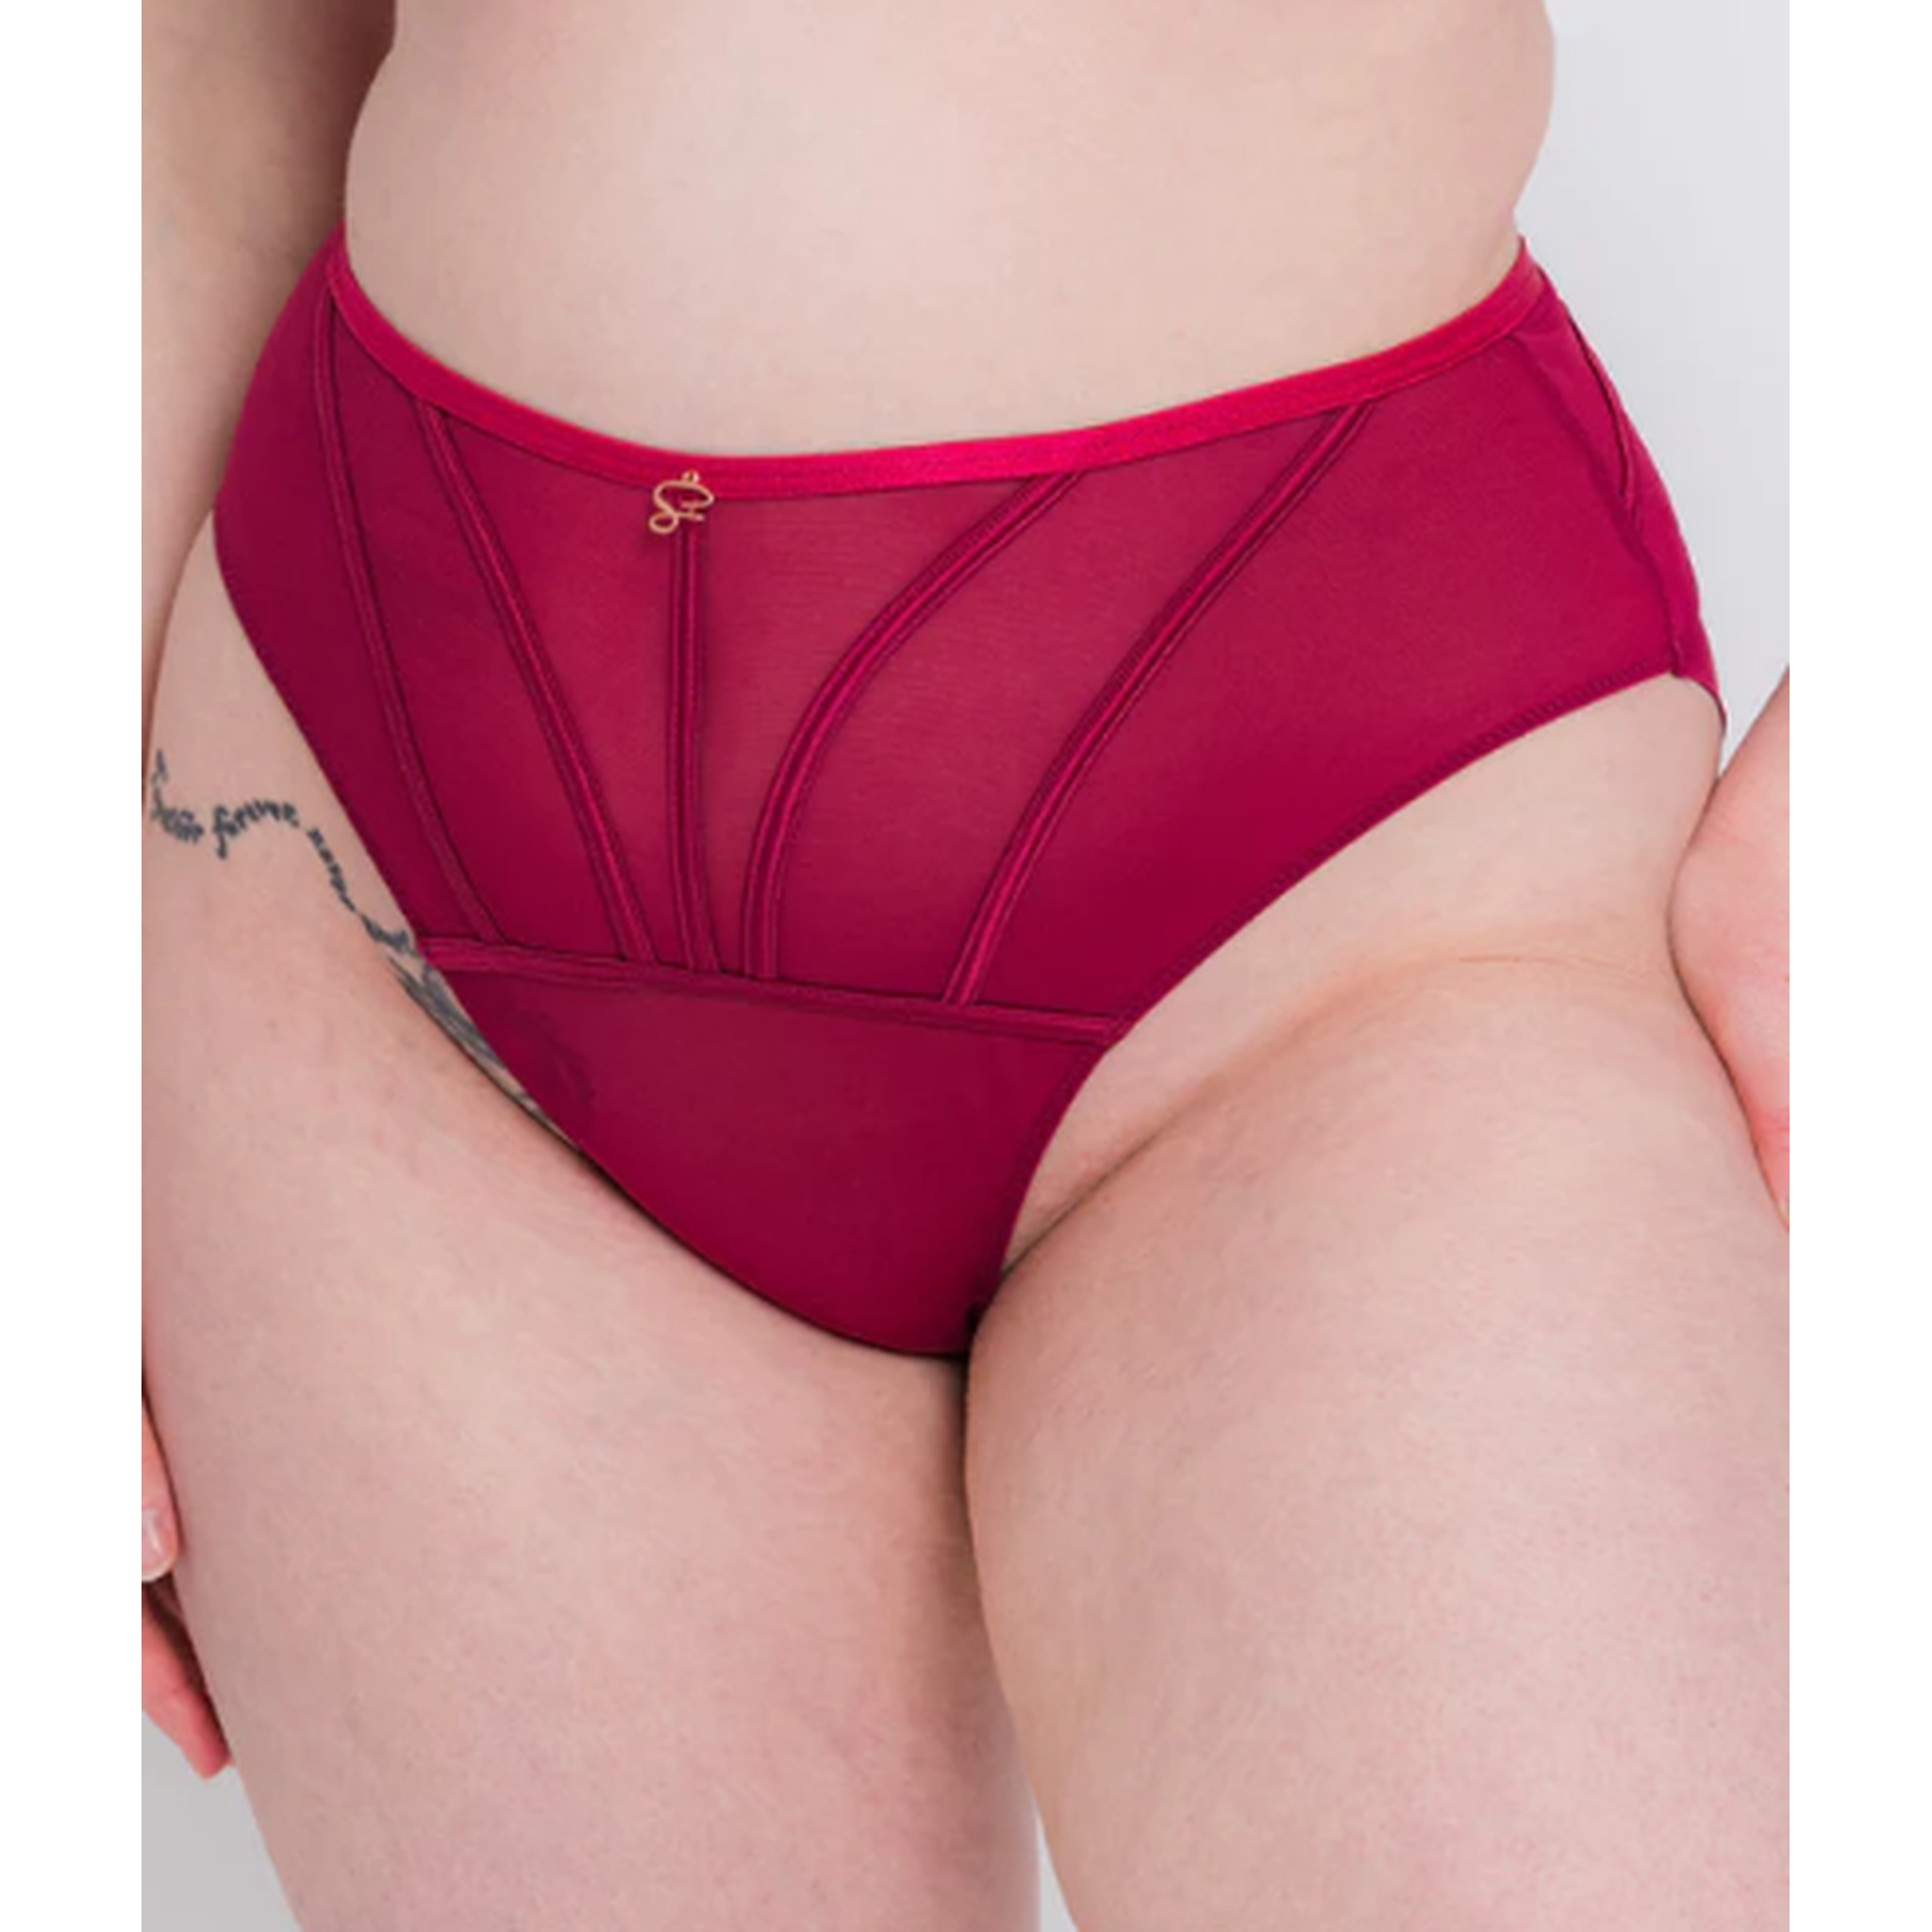 Scantilly Senses High Waist Brief in Cherry color